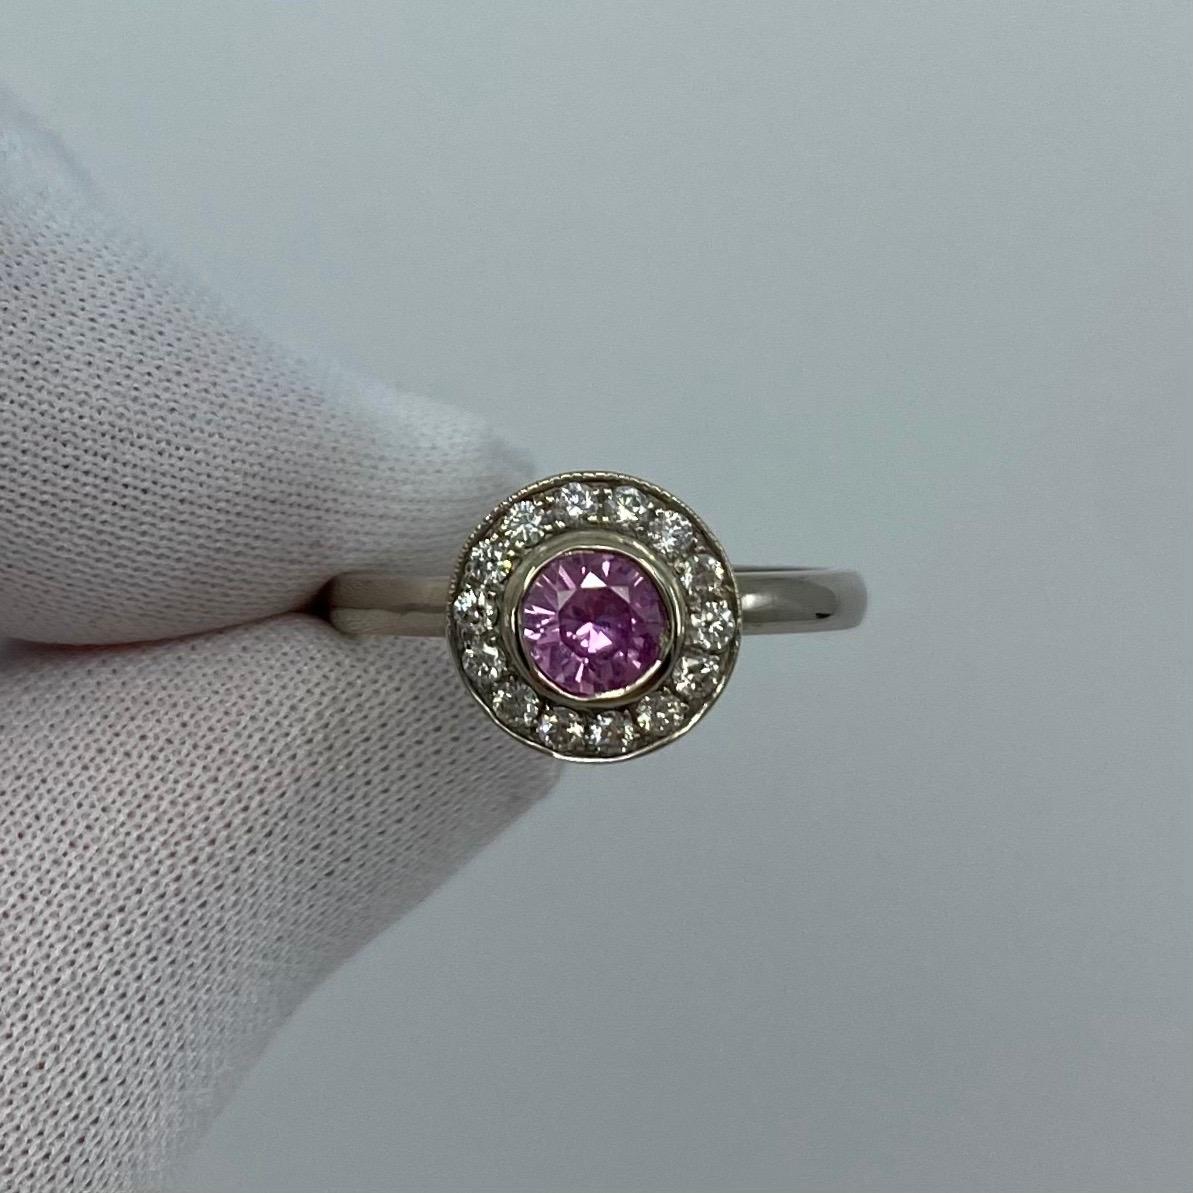 Round Bright Pink Sapphire & Diamond 18k White Gold Halo Ring.

A stunning 18k white gold pink sapphire halo ring with accent diamonds.
0.85 Carat centre sapphire with a beautiful pink colour, excellent round cut and clarity, very clean